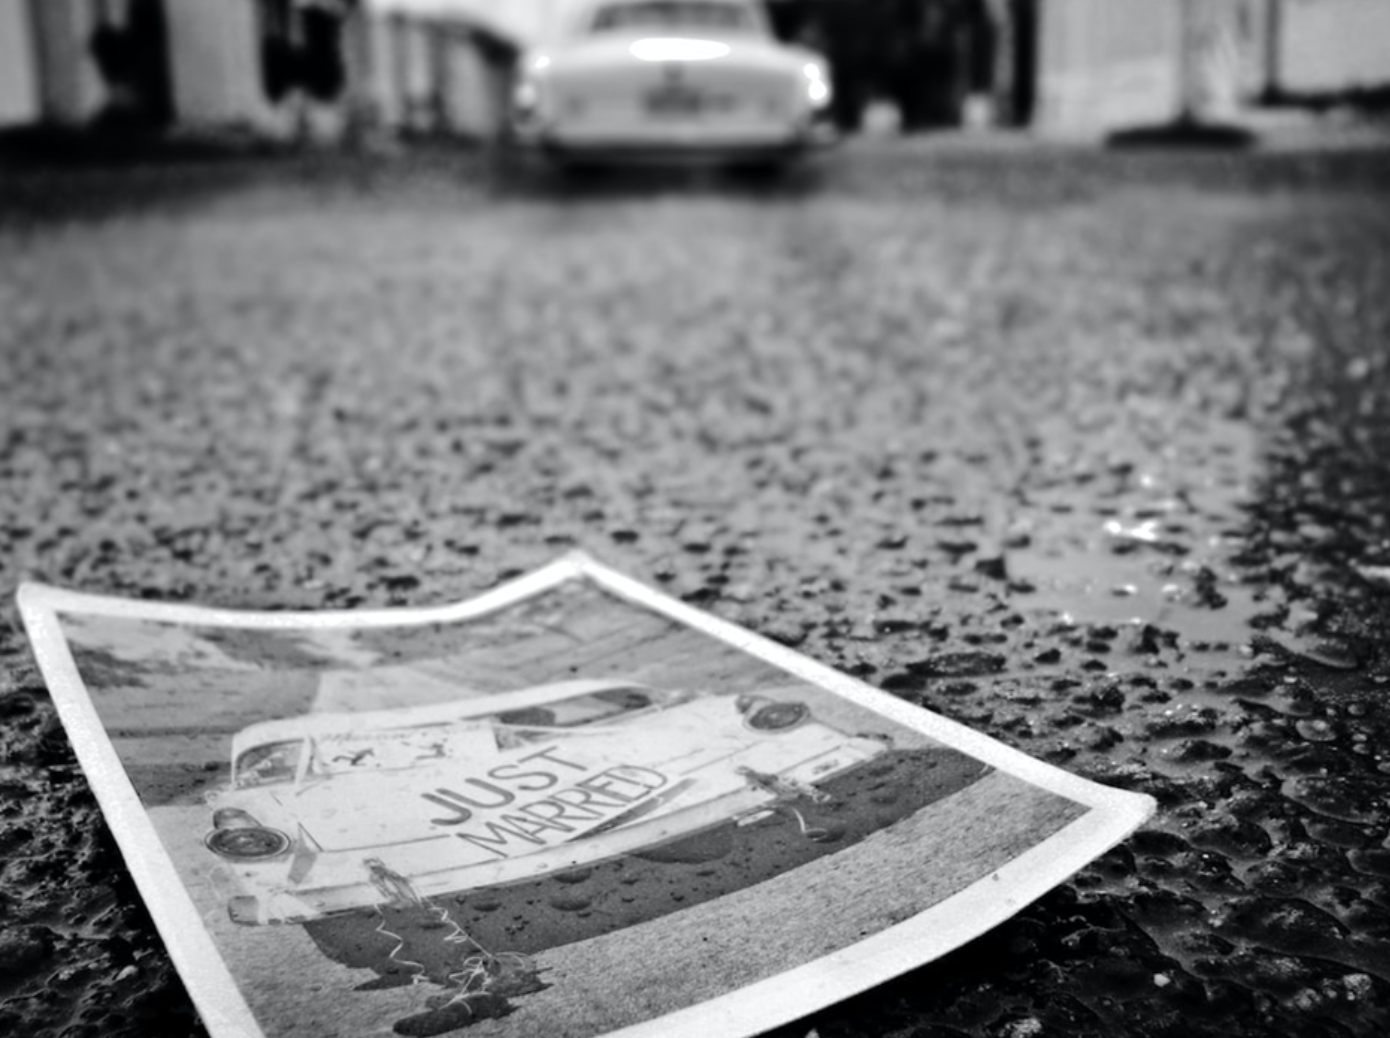 Black and white photo of car driving away, a paper with a picture of the car and a Just Married sign discarded on the pavement; image by Eduardo Sáchez, via Unsplash.com.